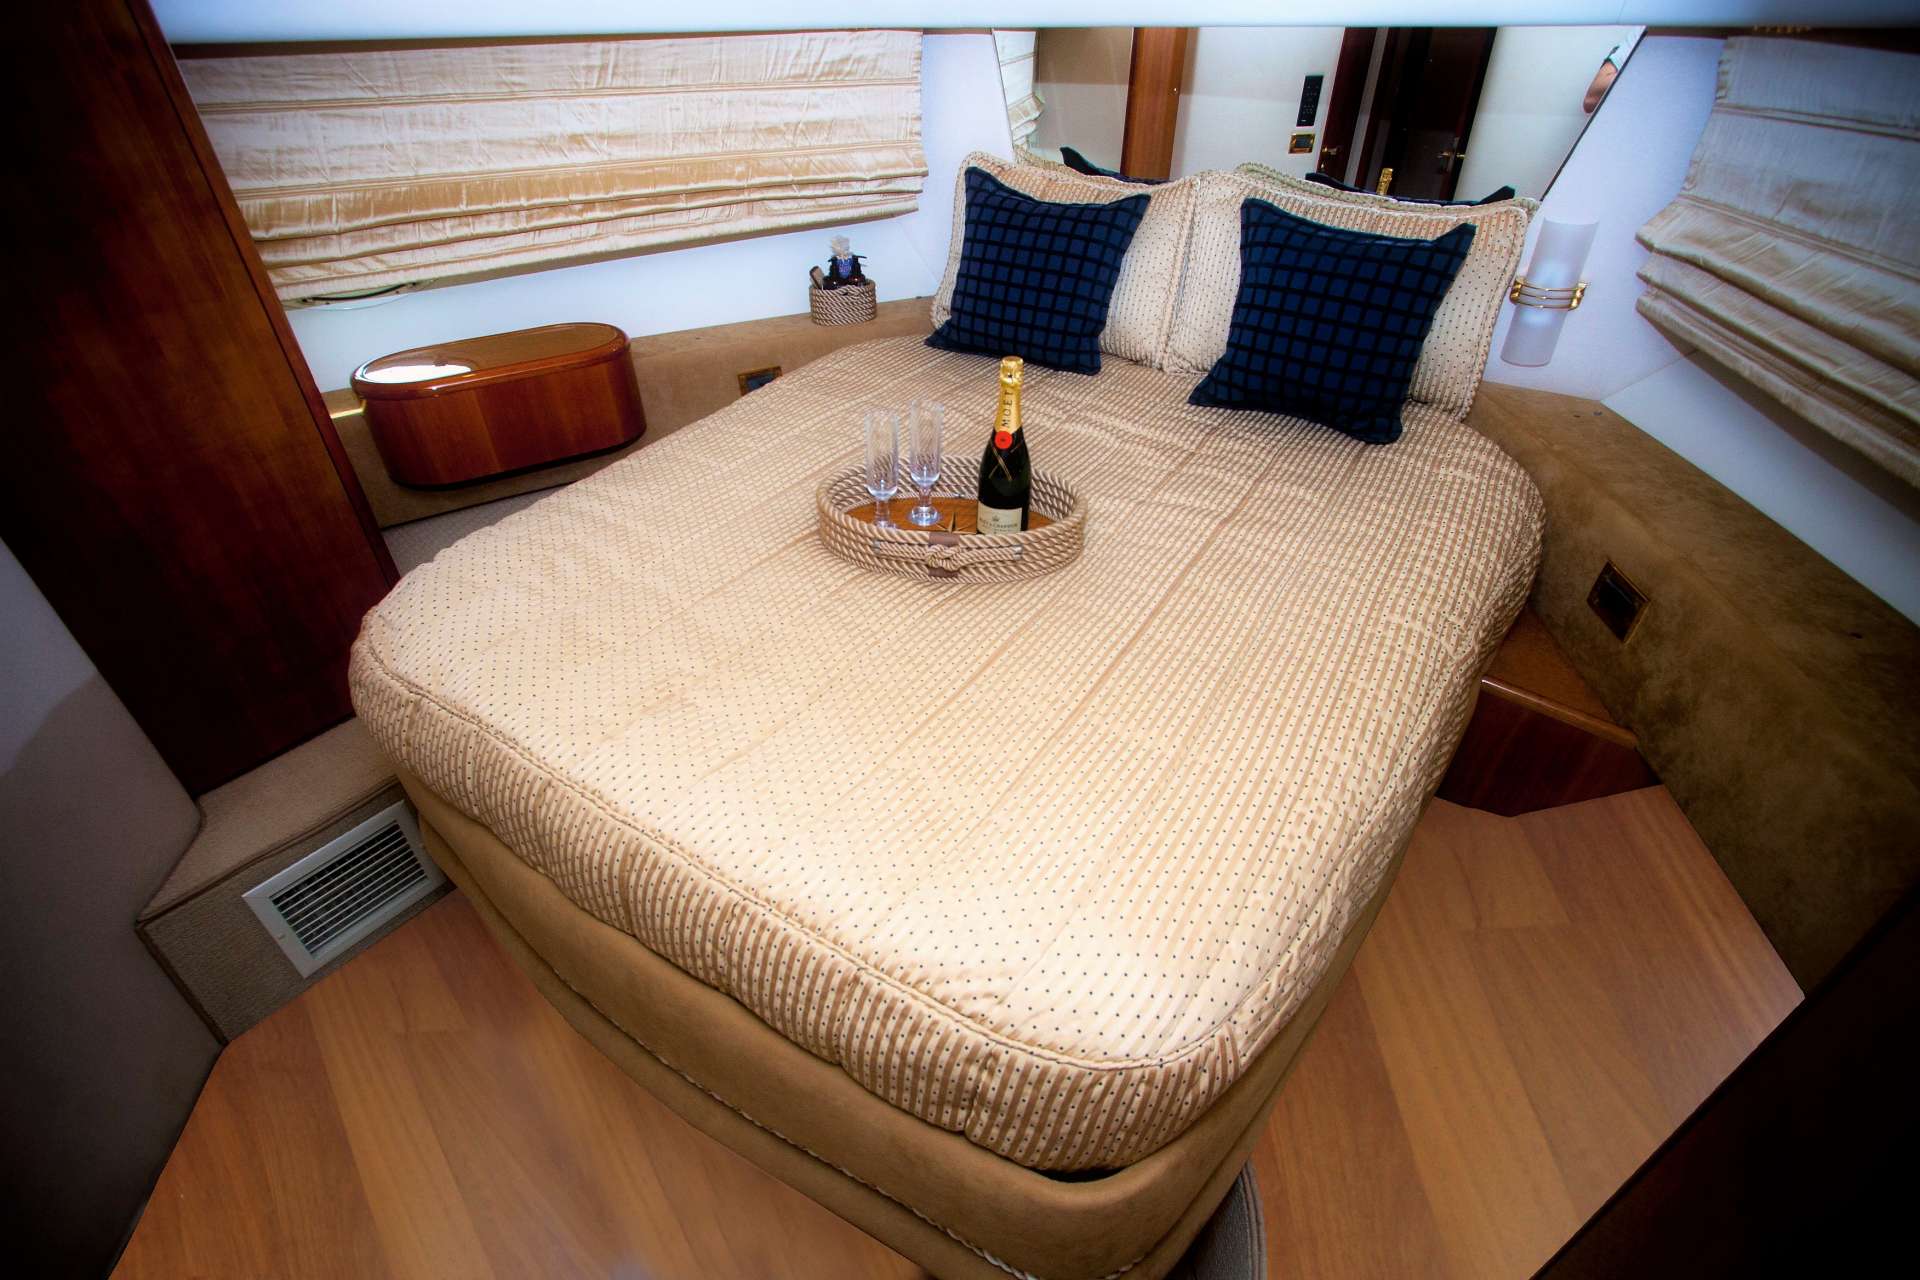 AVENTURA II Yacht Charter - Master Cabin, with a large en suite bathroom and separate shower unit